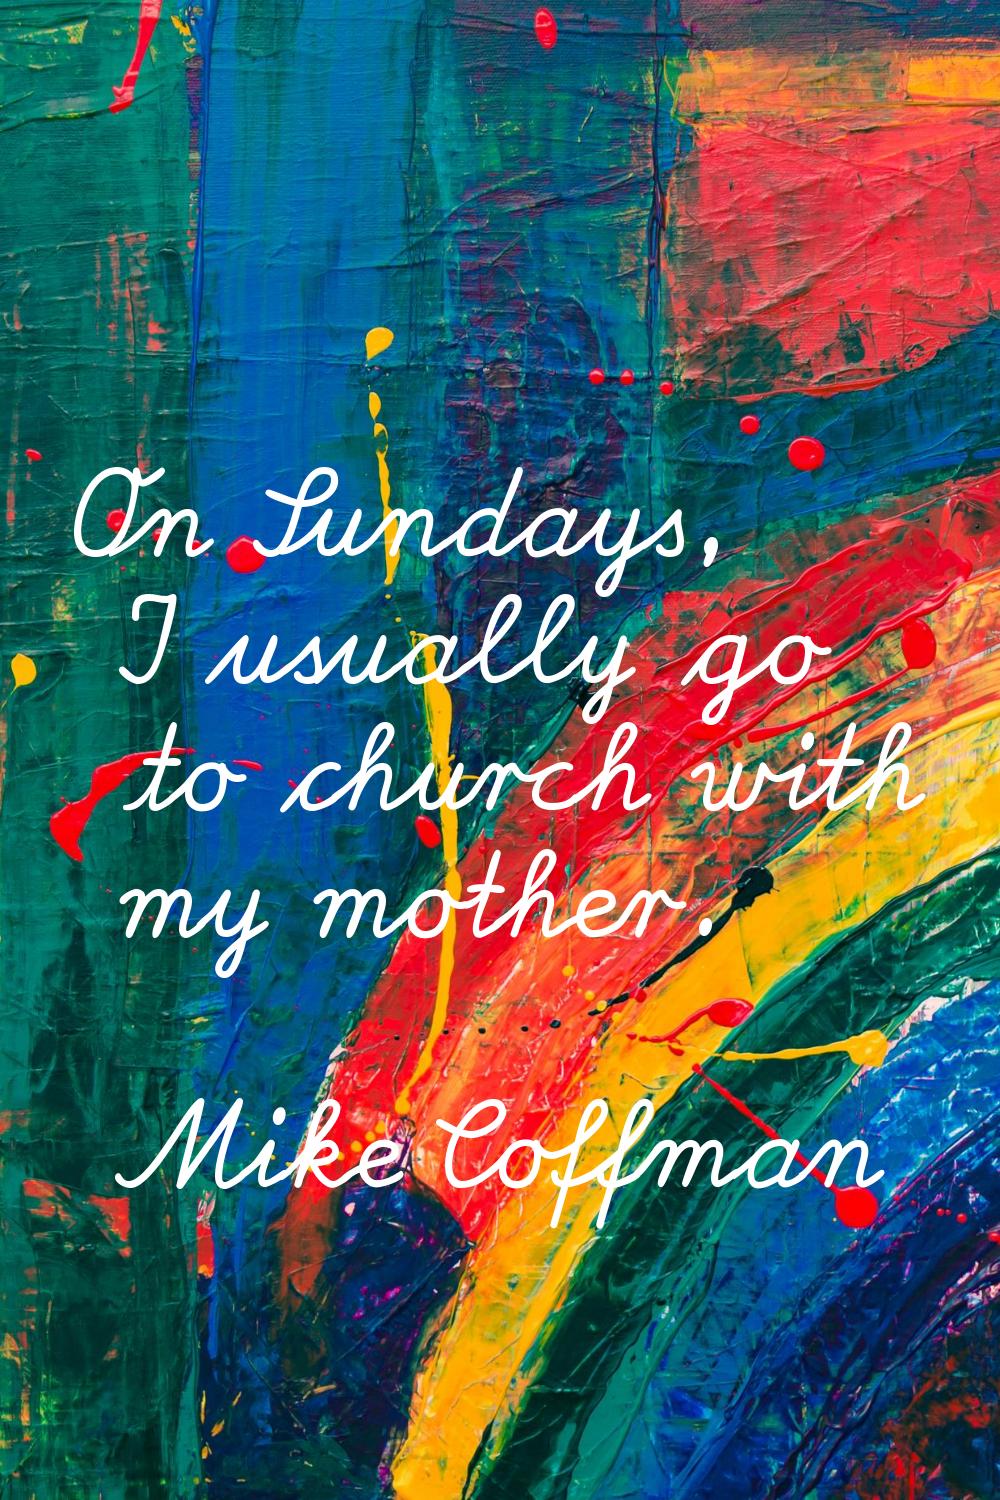 On Sundays, I usually go to church with my mother.